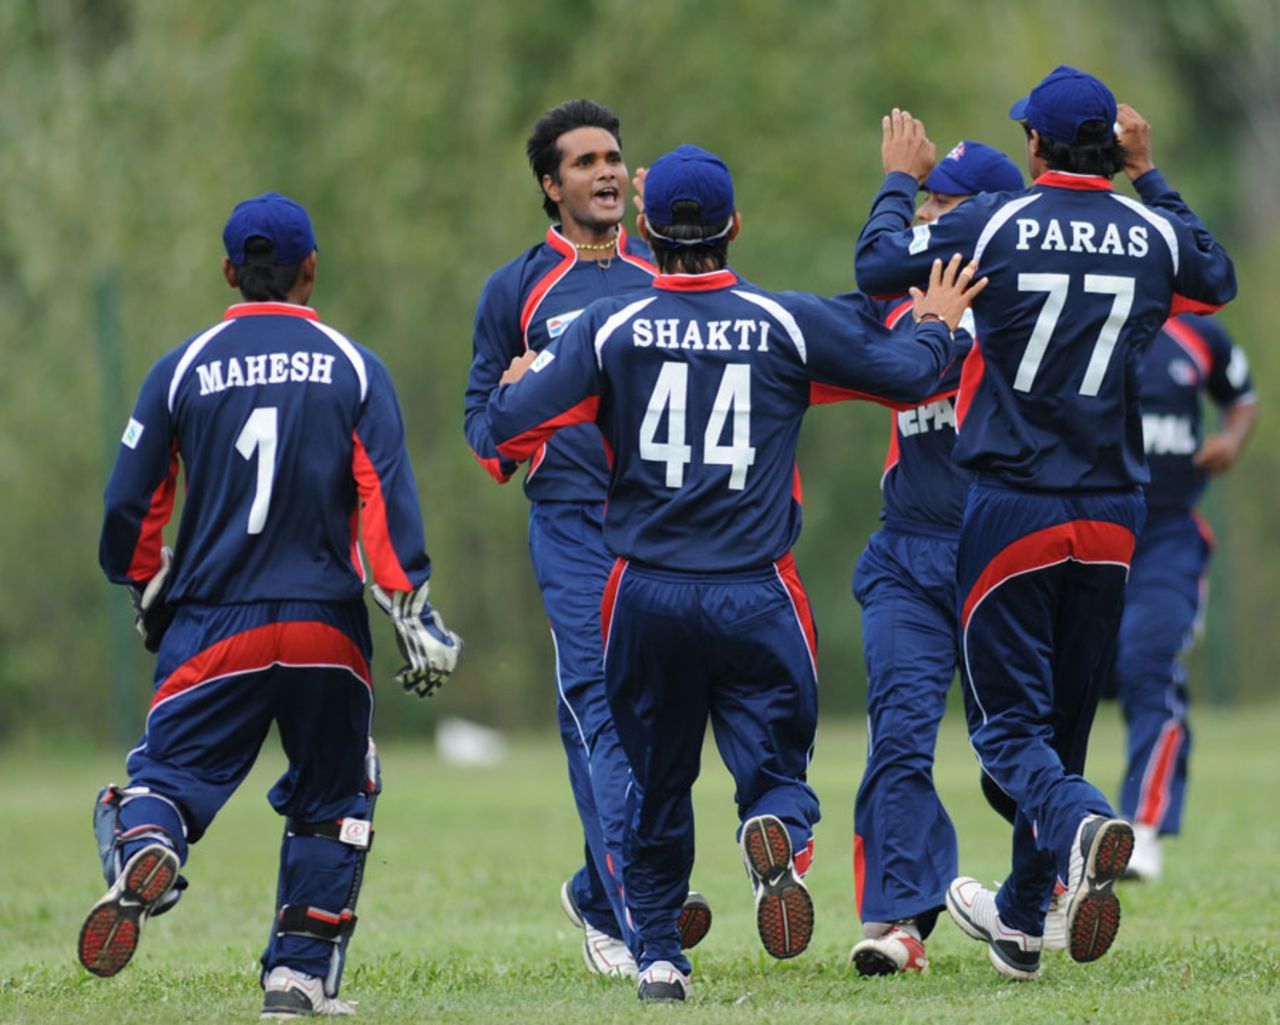 Nepal bowler Binod Das celebrates a dismissal with his team-mates, Italy v Nepal, ICC World Cricket League Division Four, Pianoro, August 15, 2010